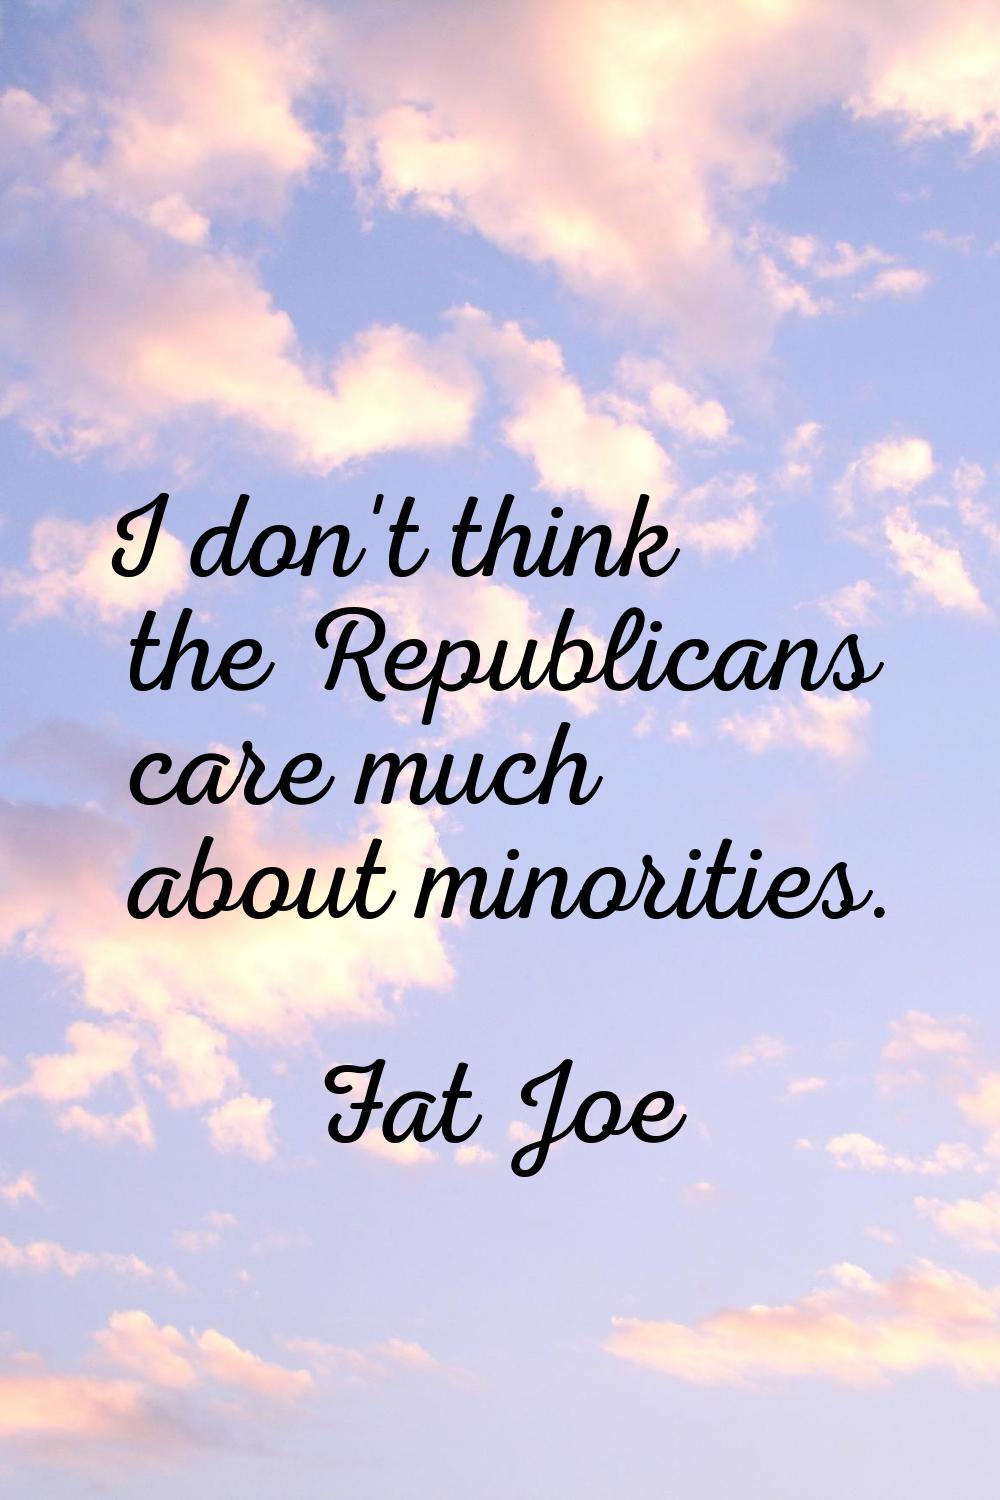 I don't think the Republicans care much about minorities.